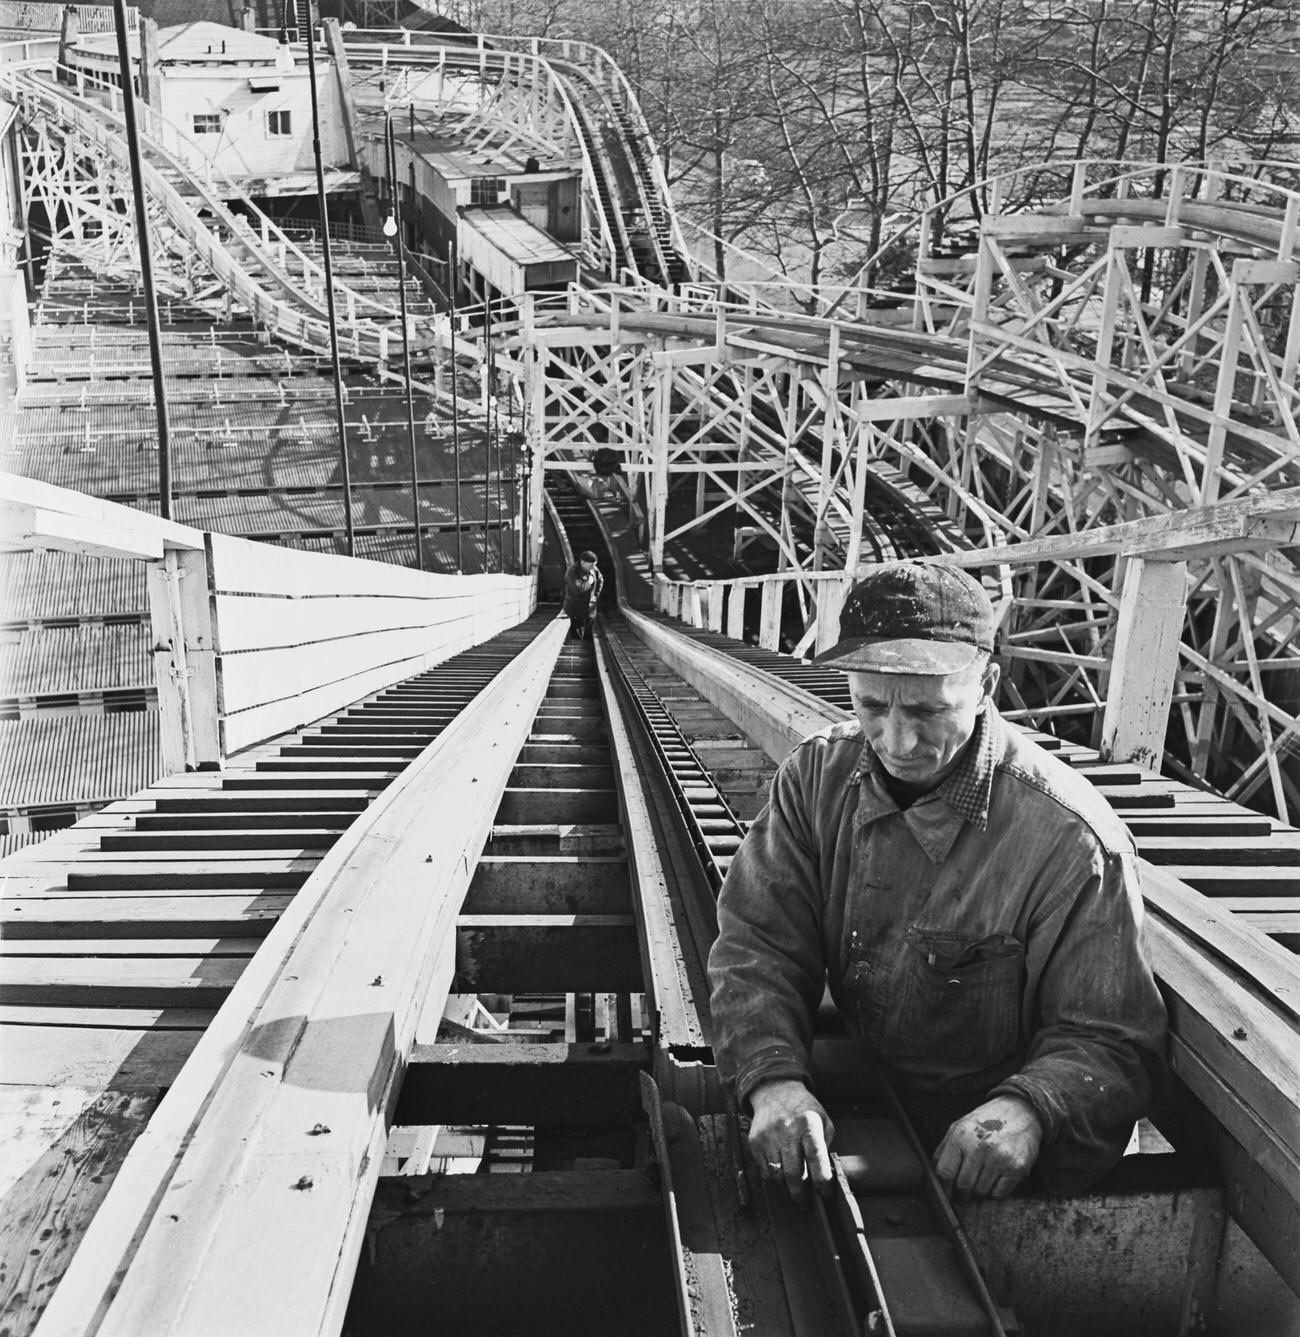 Working On Rollercoaster Chain Lift At Coney Island, 1950